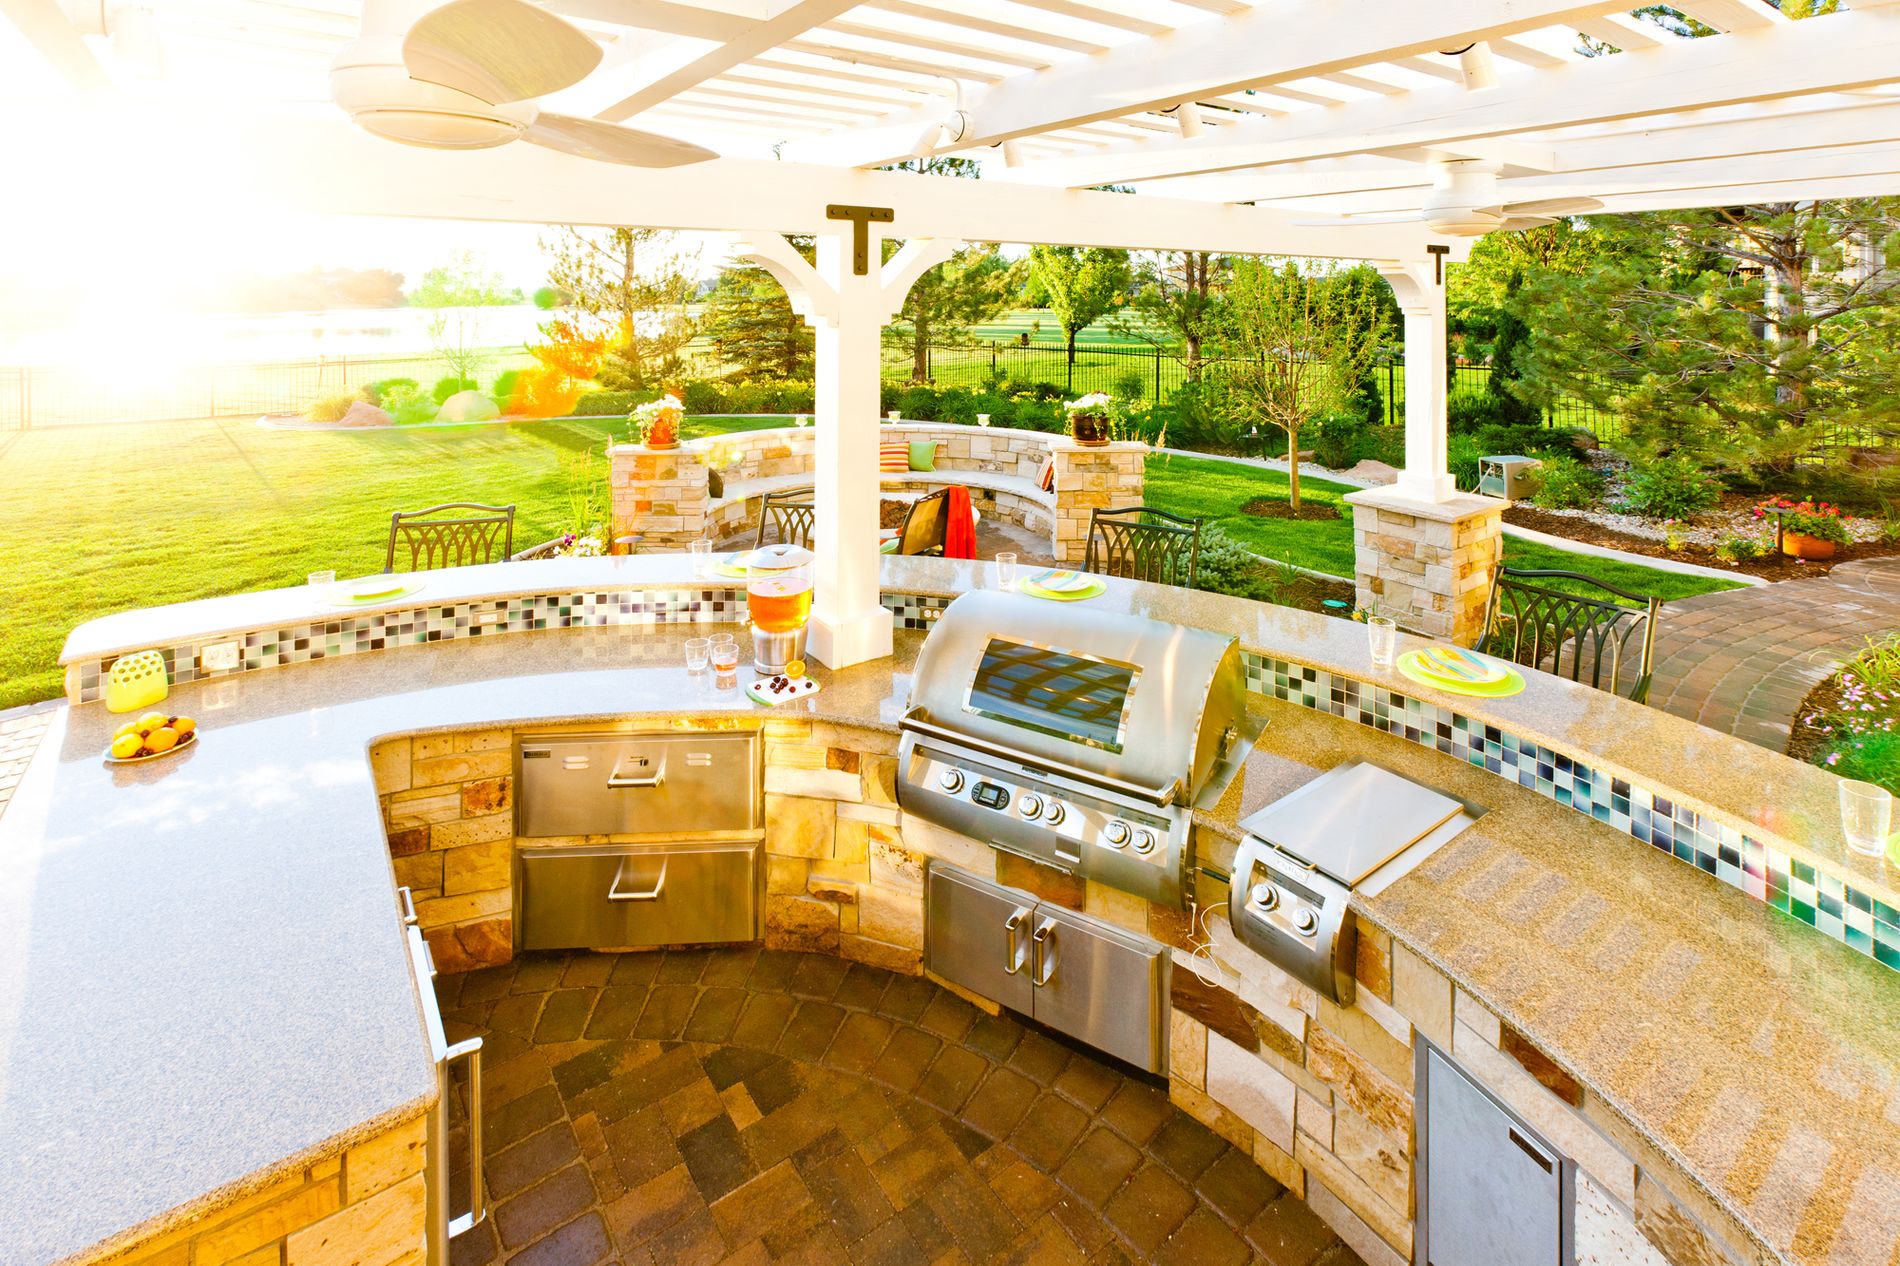 Outdoor kitchen and shade structure